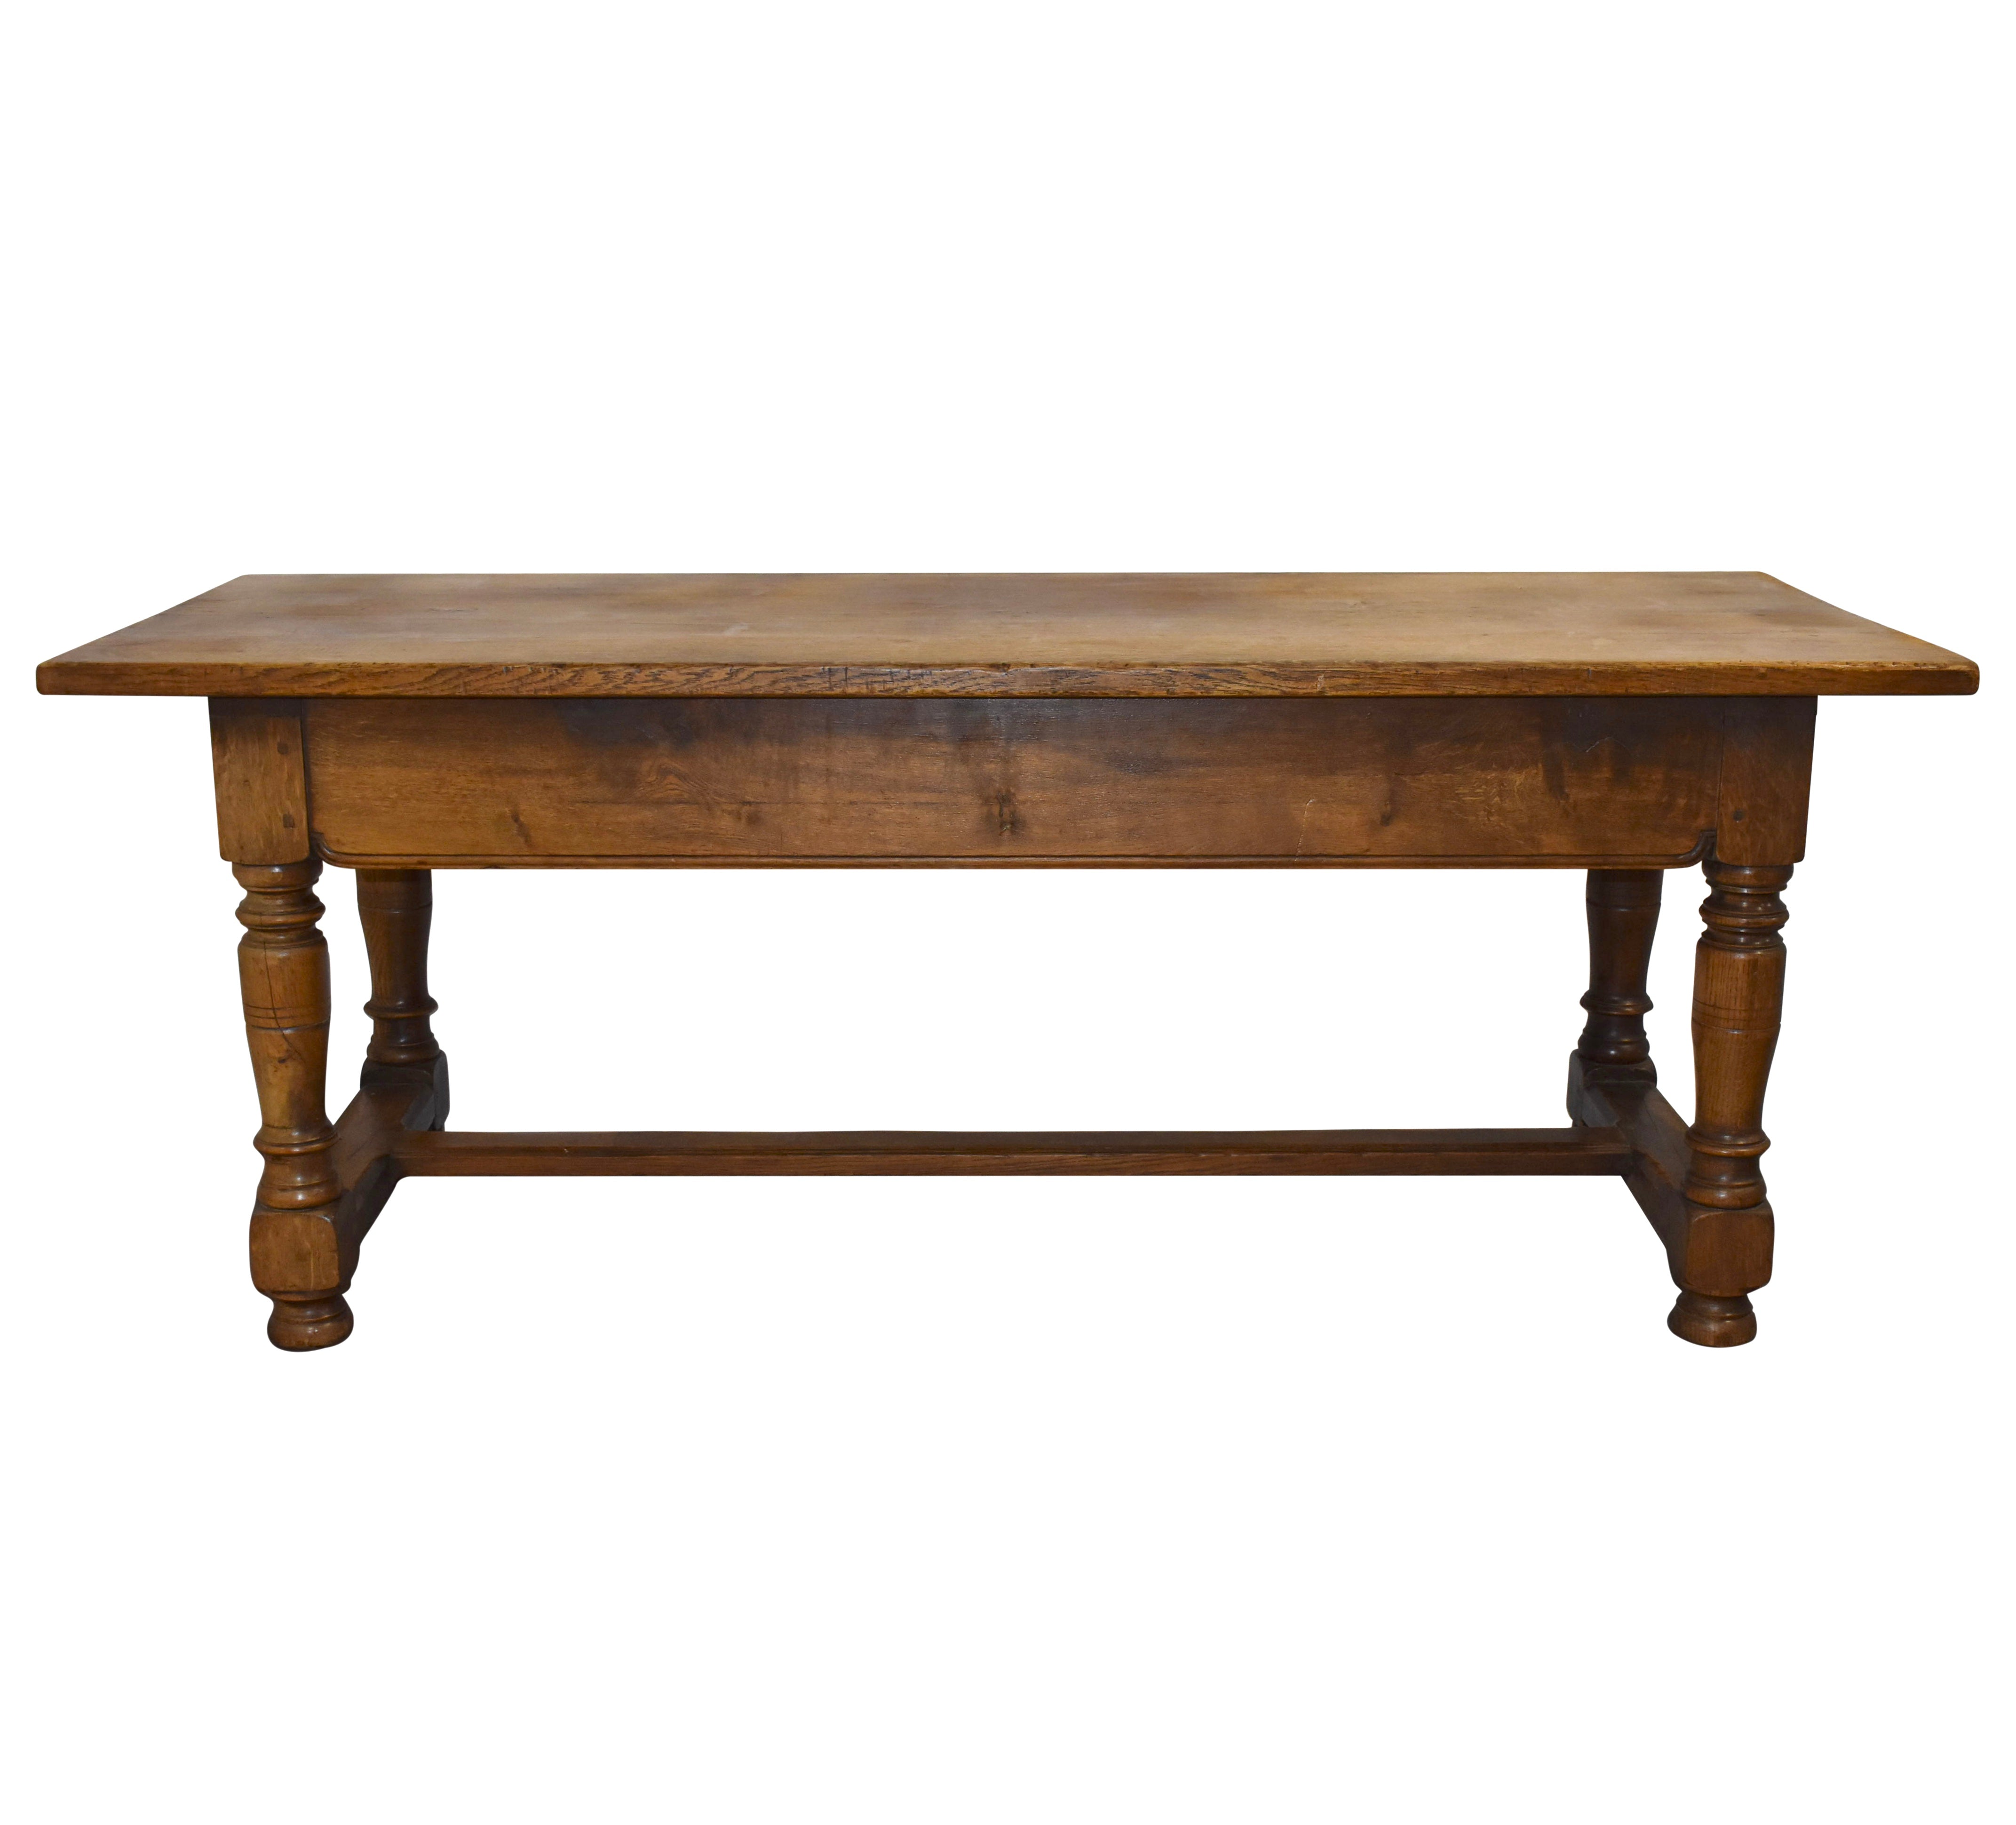 Oak Farm Table with Drawers